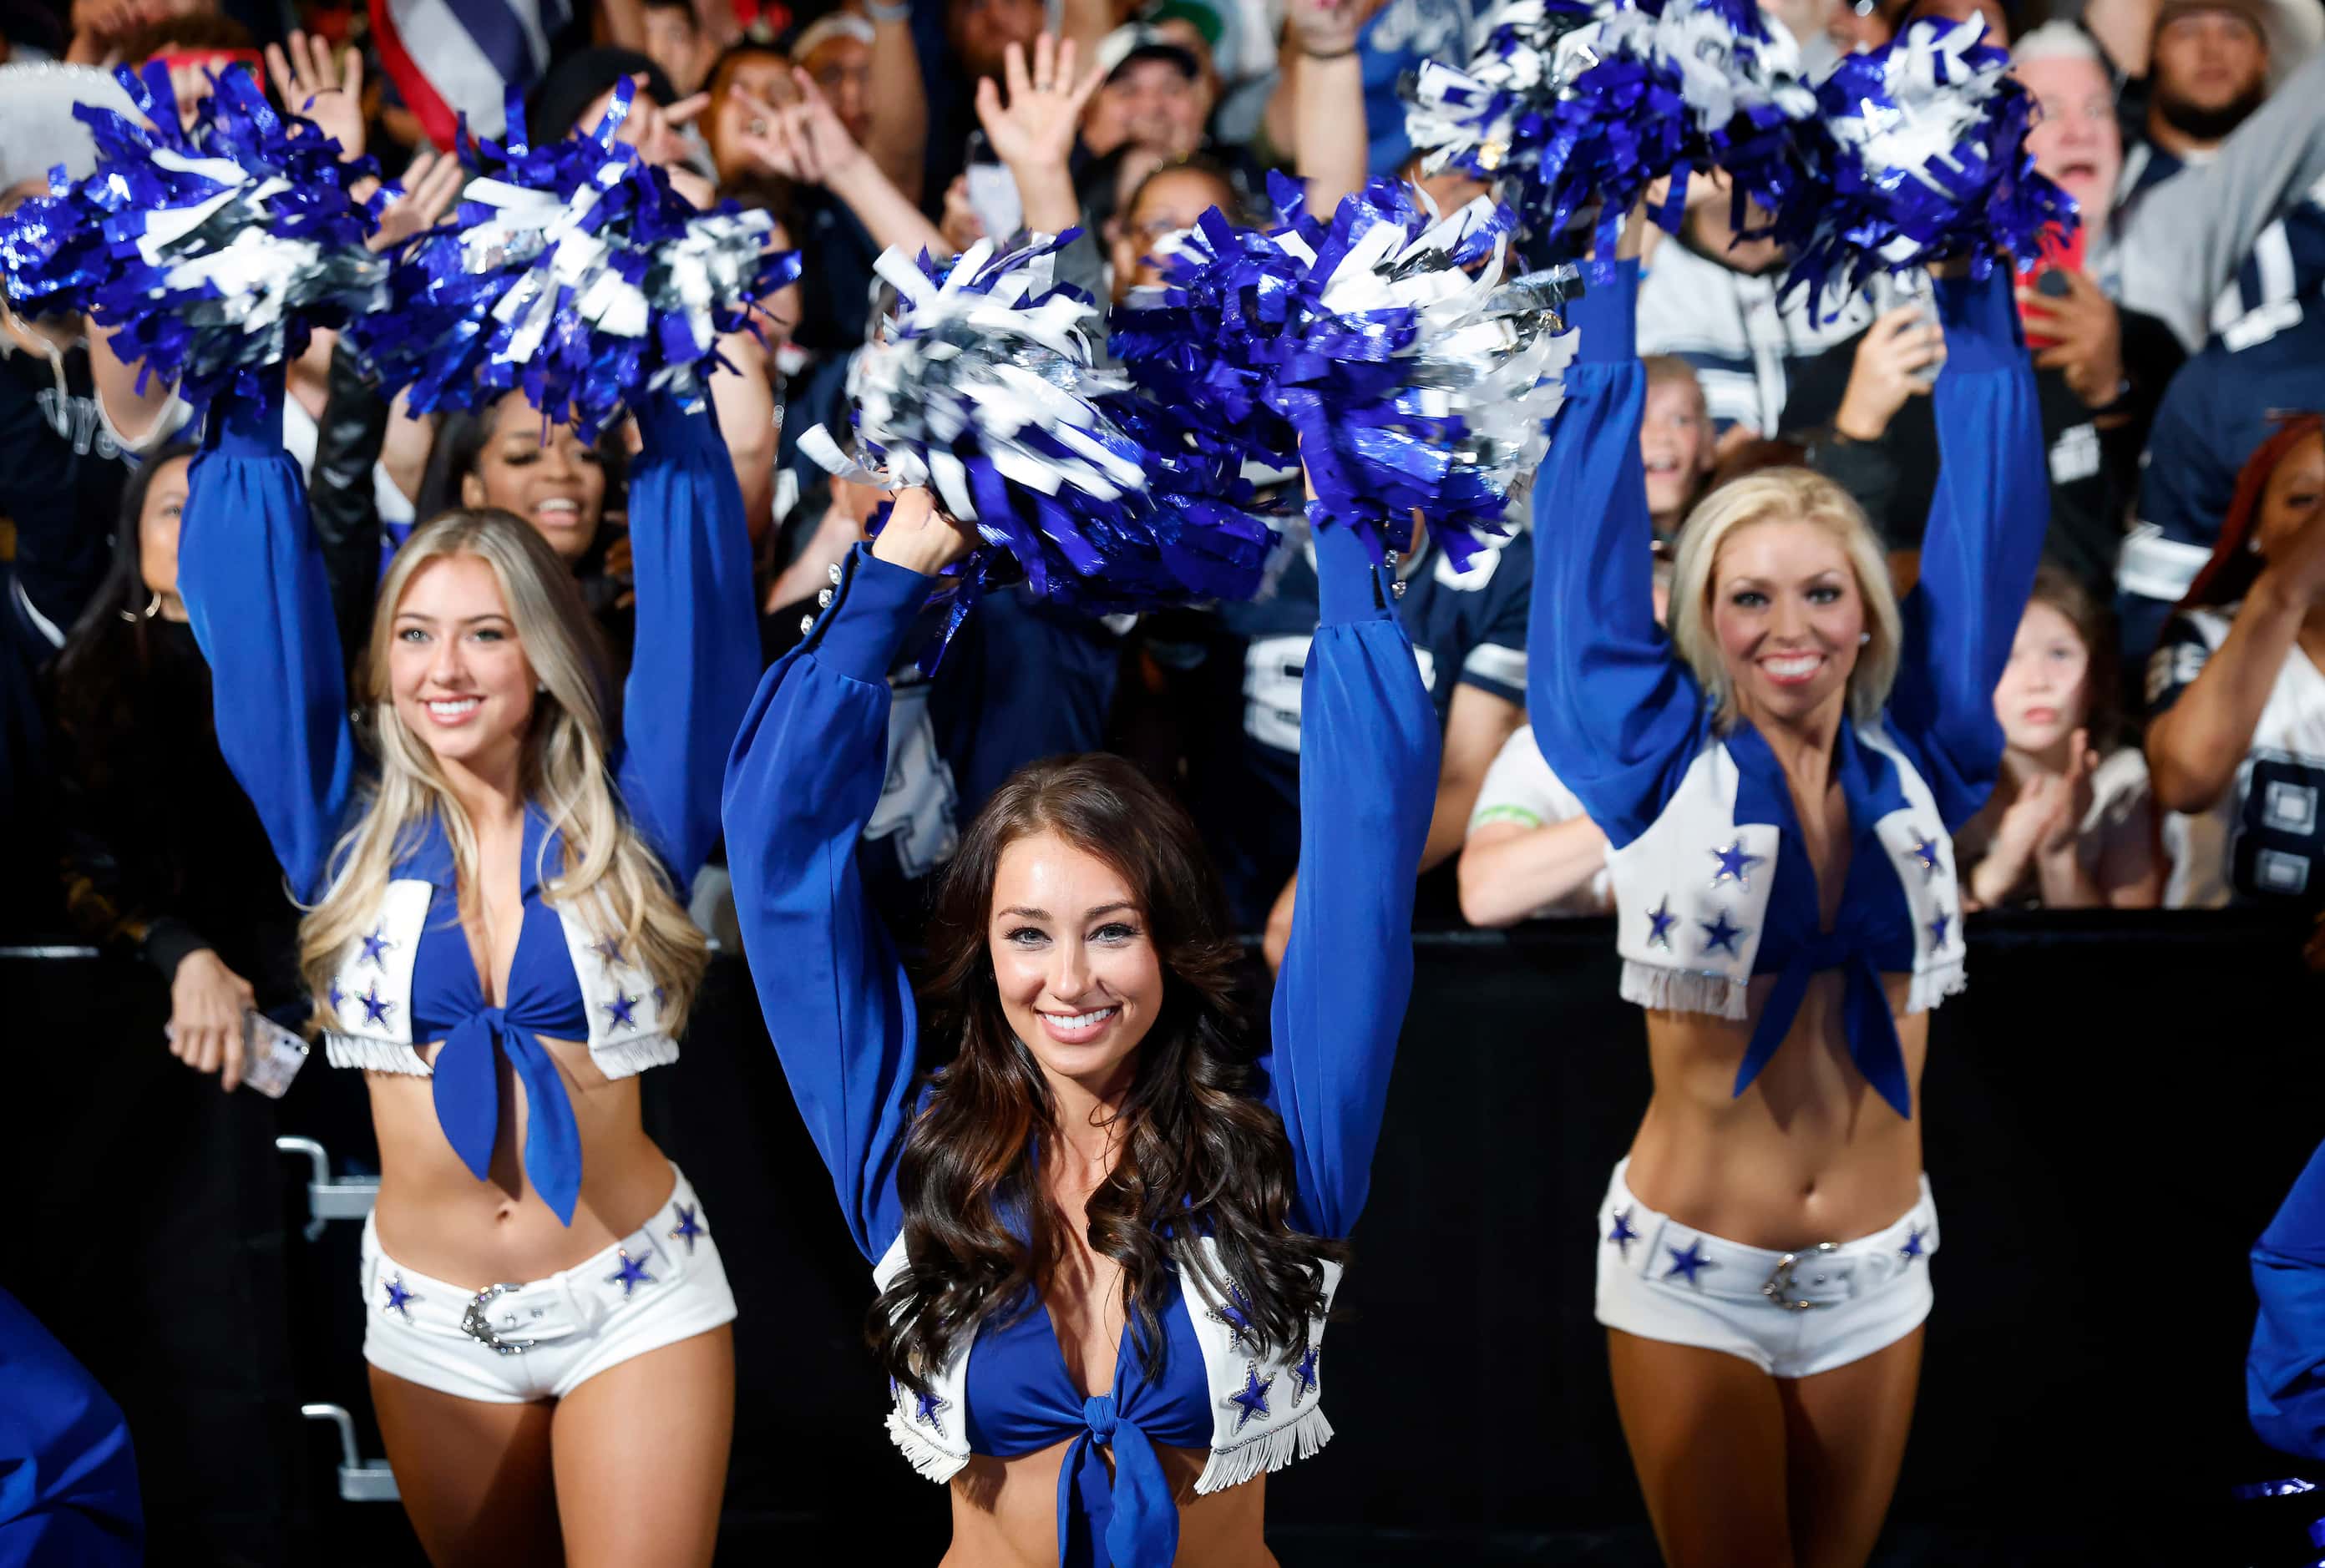 Dallas Cowboys Cheerleaders perform for fans before the 26th pick in the NFL Draft during a...